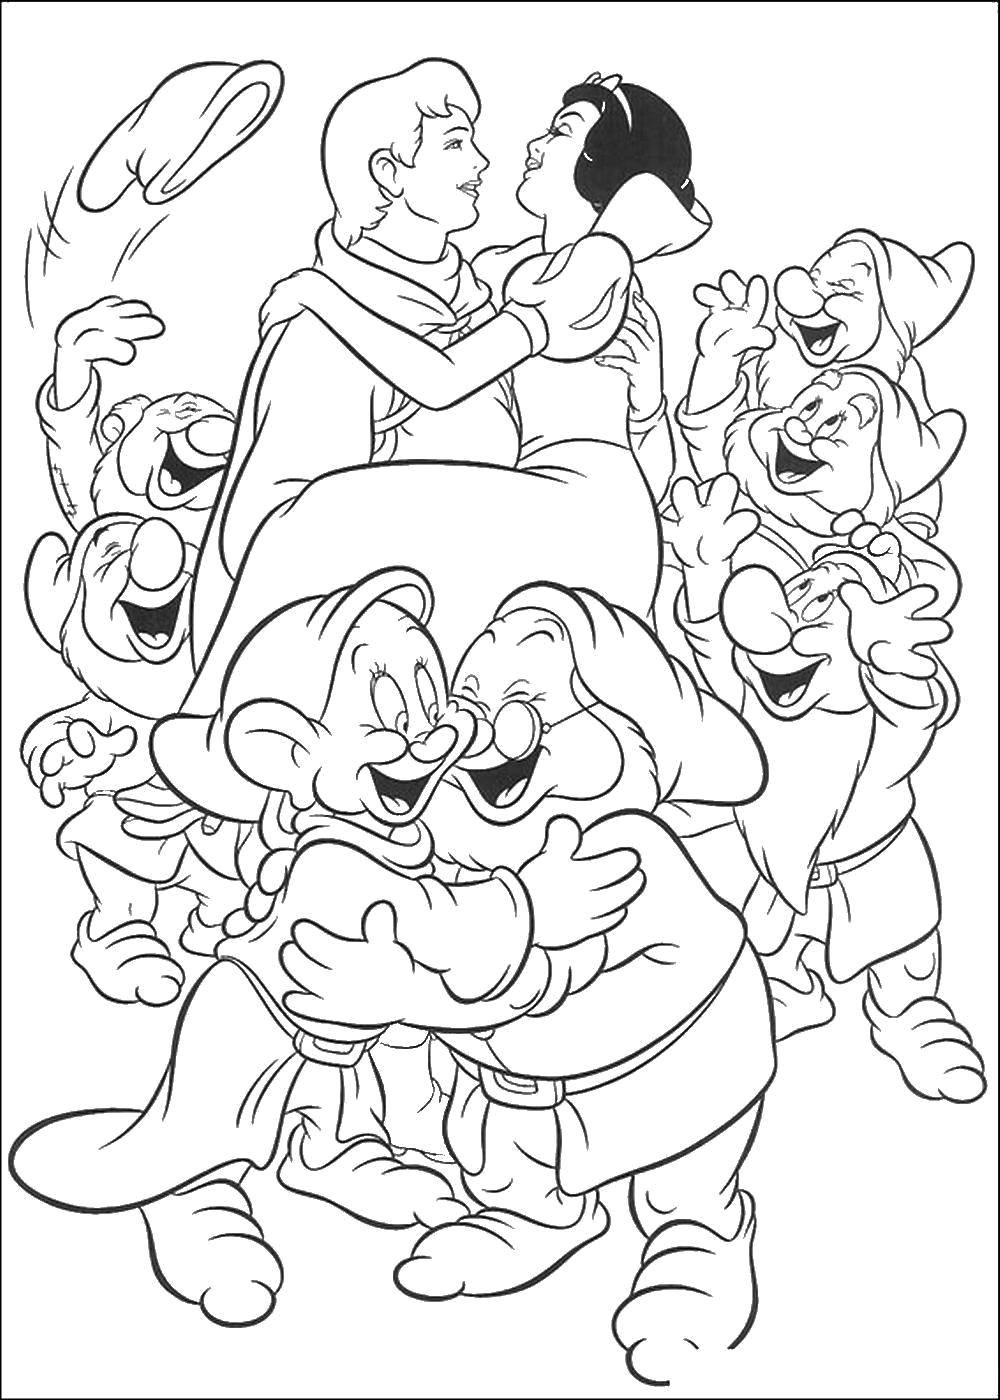 Coloring Snow white with Prince and the 7 dwarfs. Category gnomes. Tags:  Disney, Snow White.